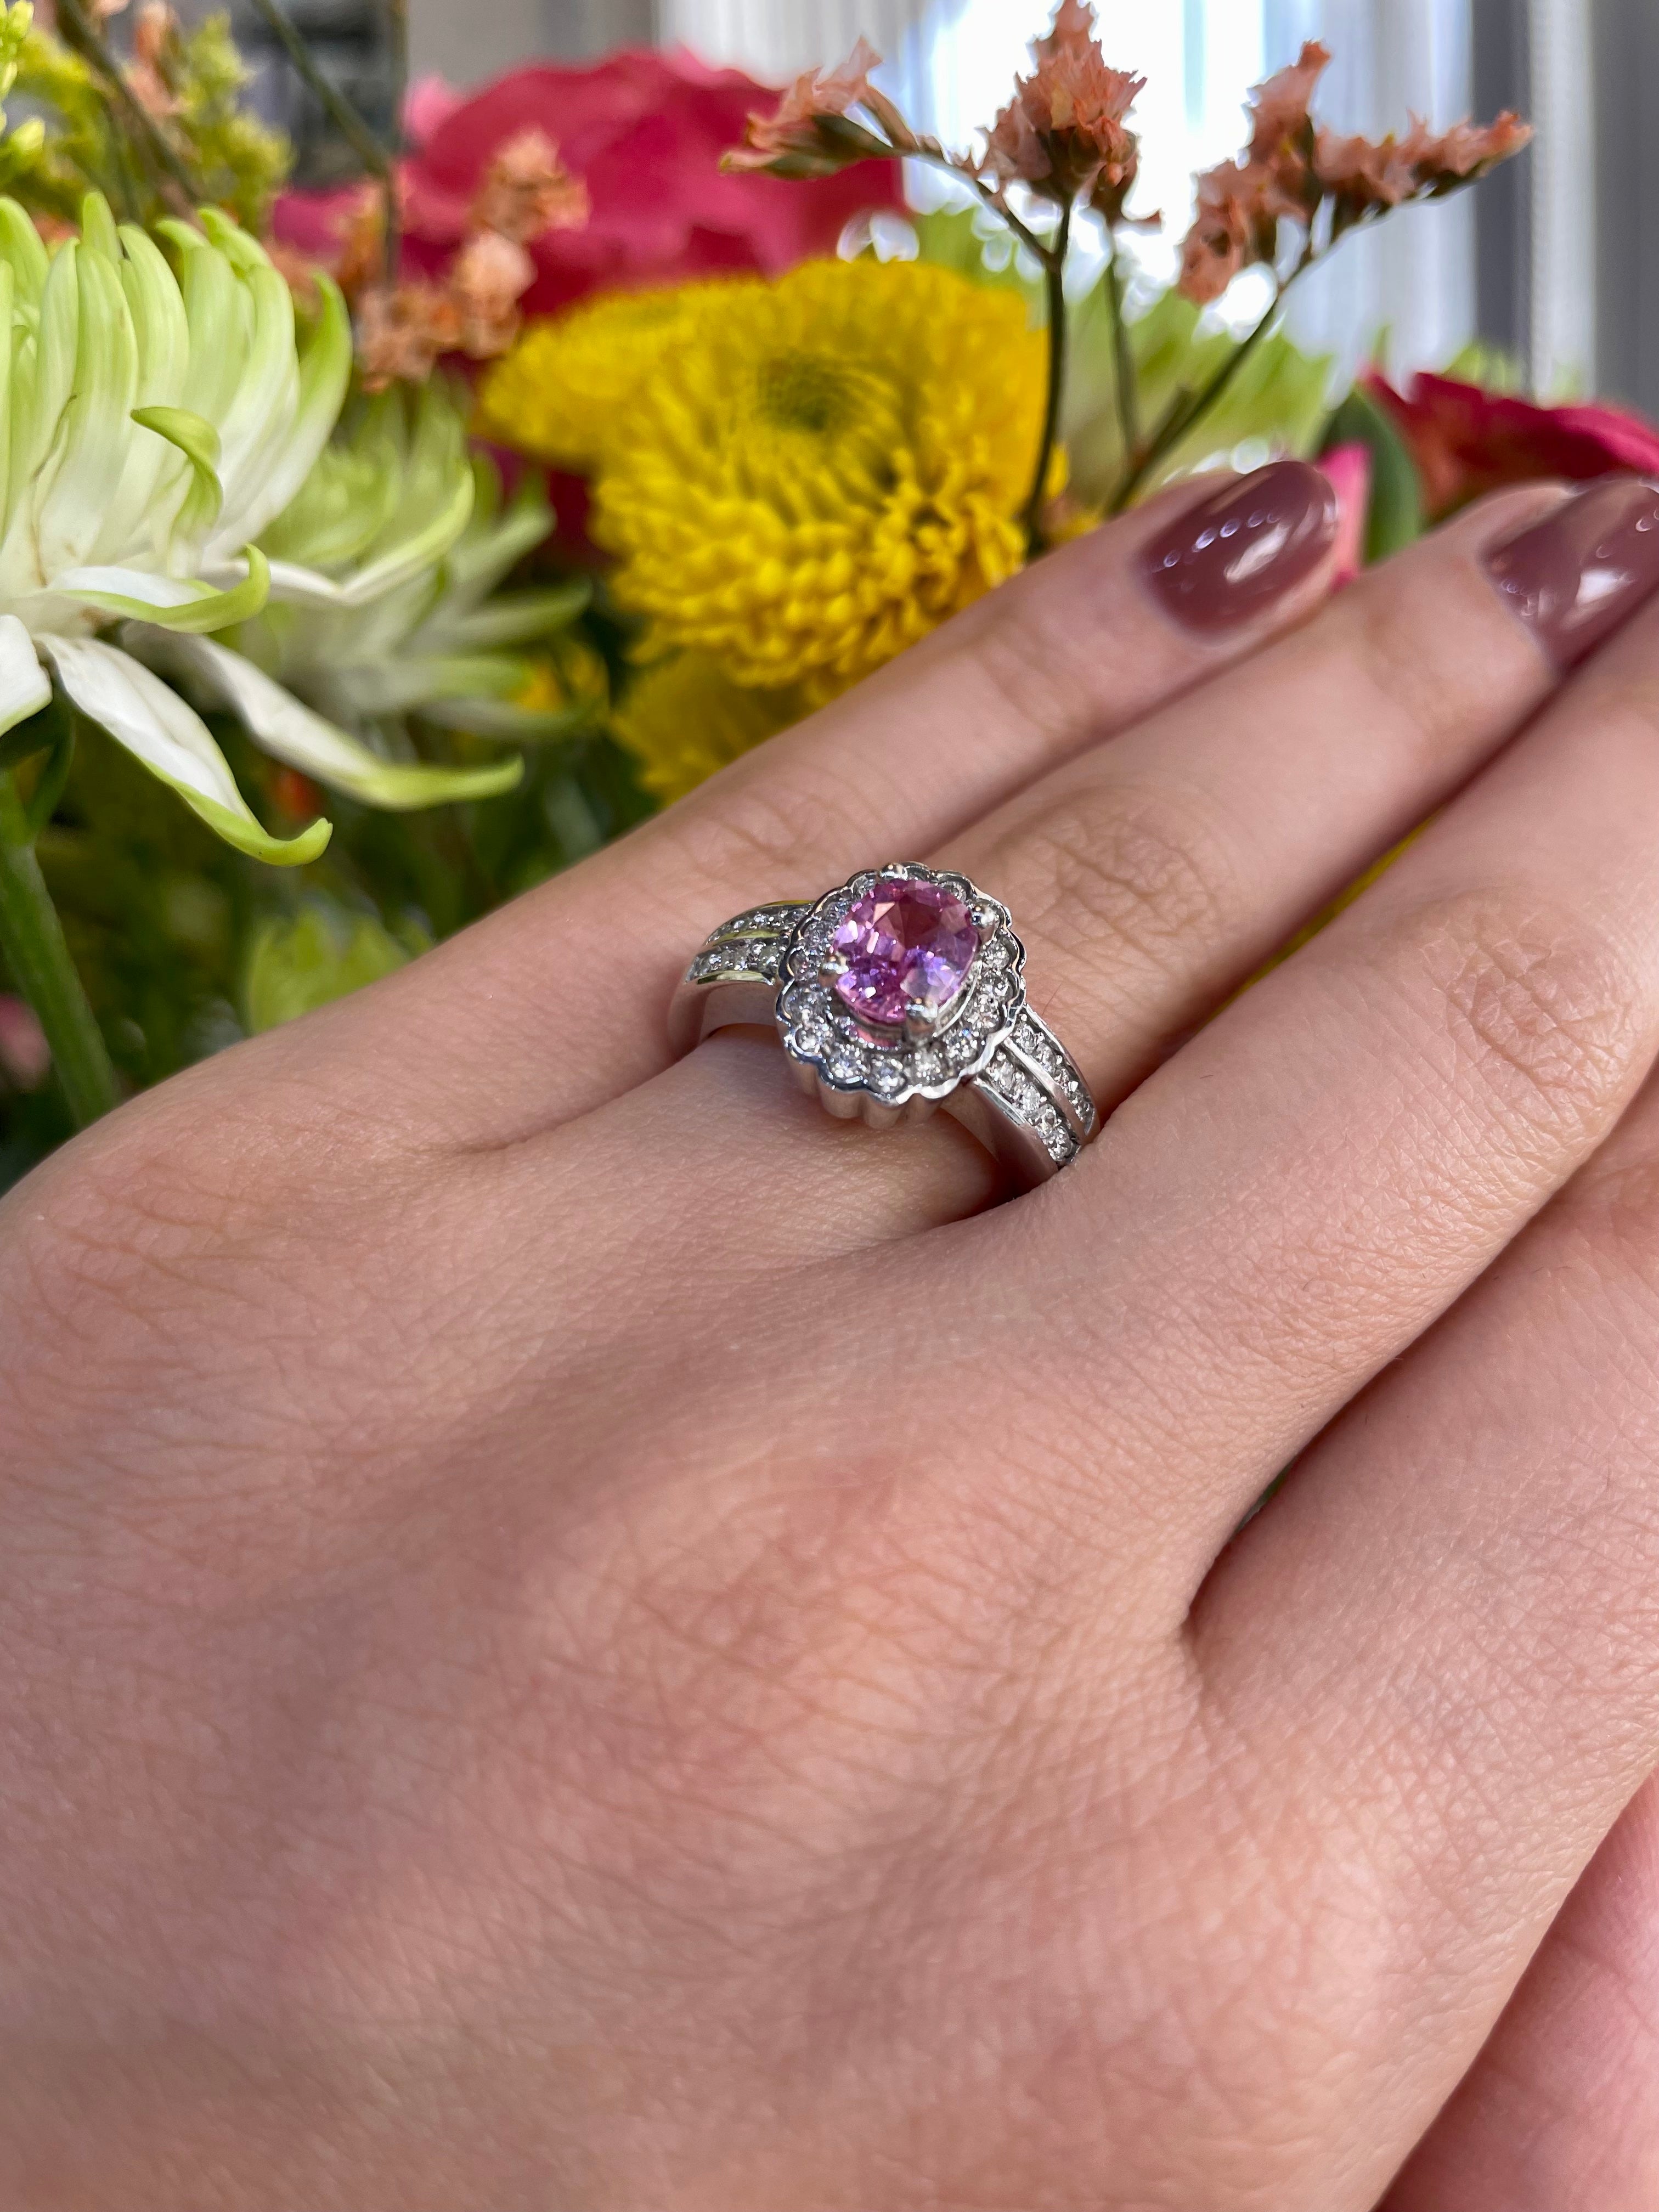 Daniel Creations Jewelry 14K White Gold Diamond and Pink Sapphire Ring